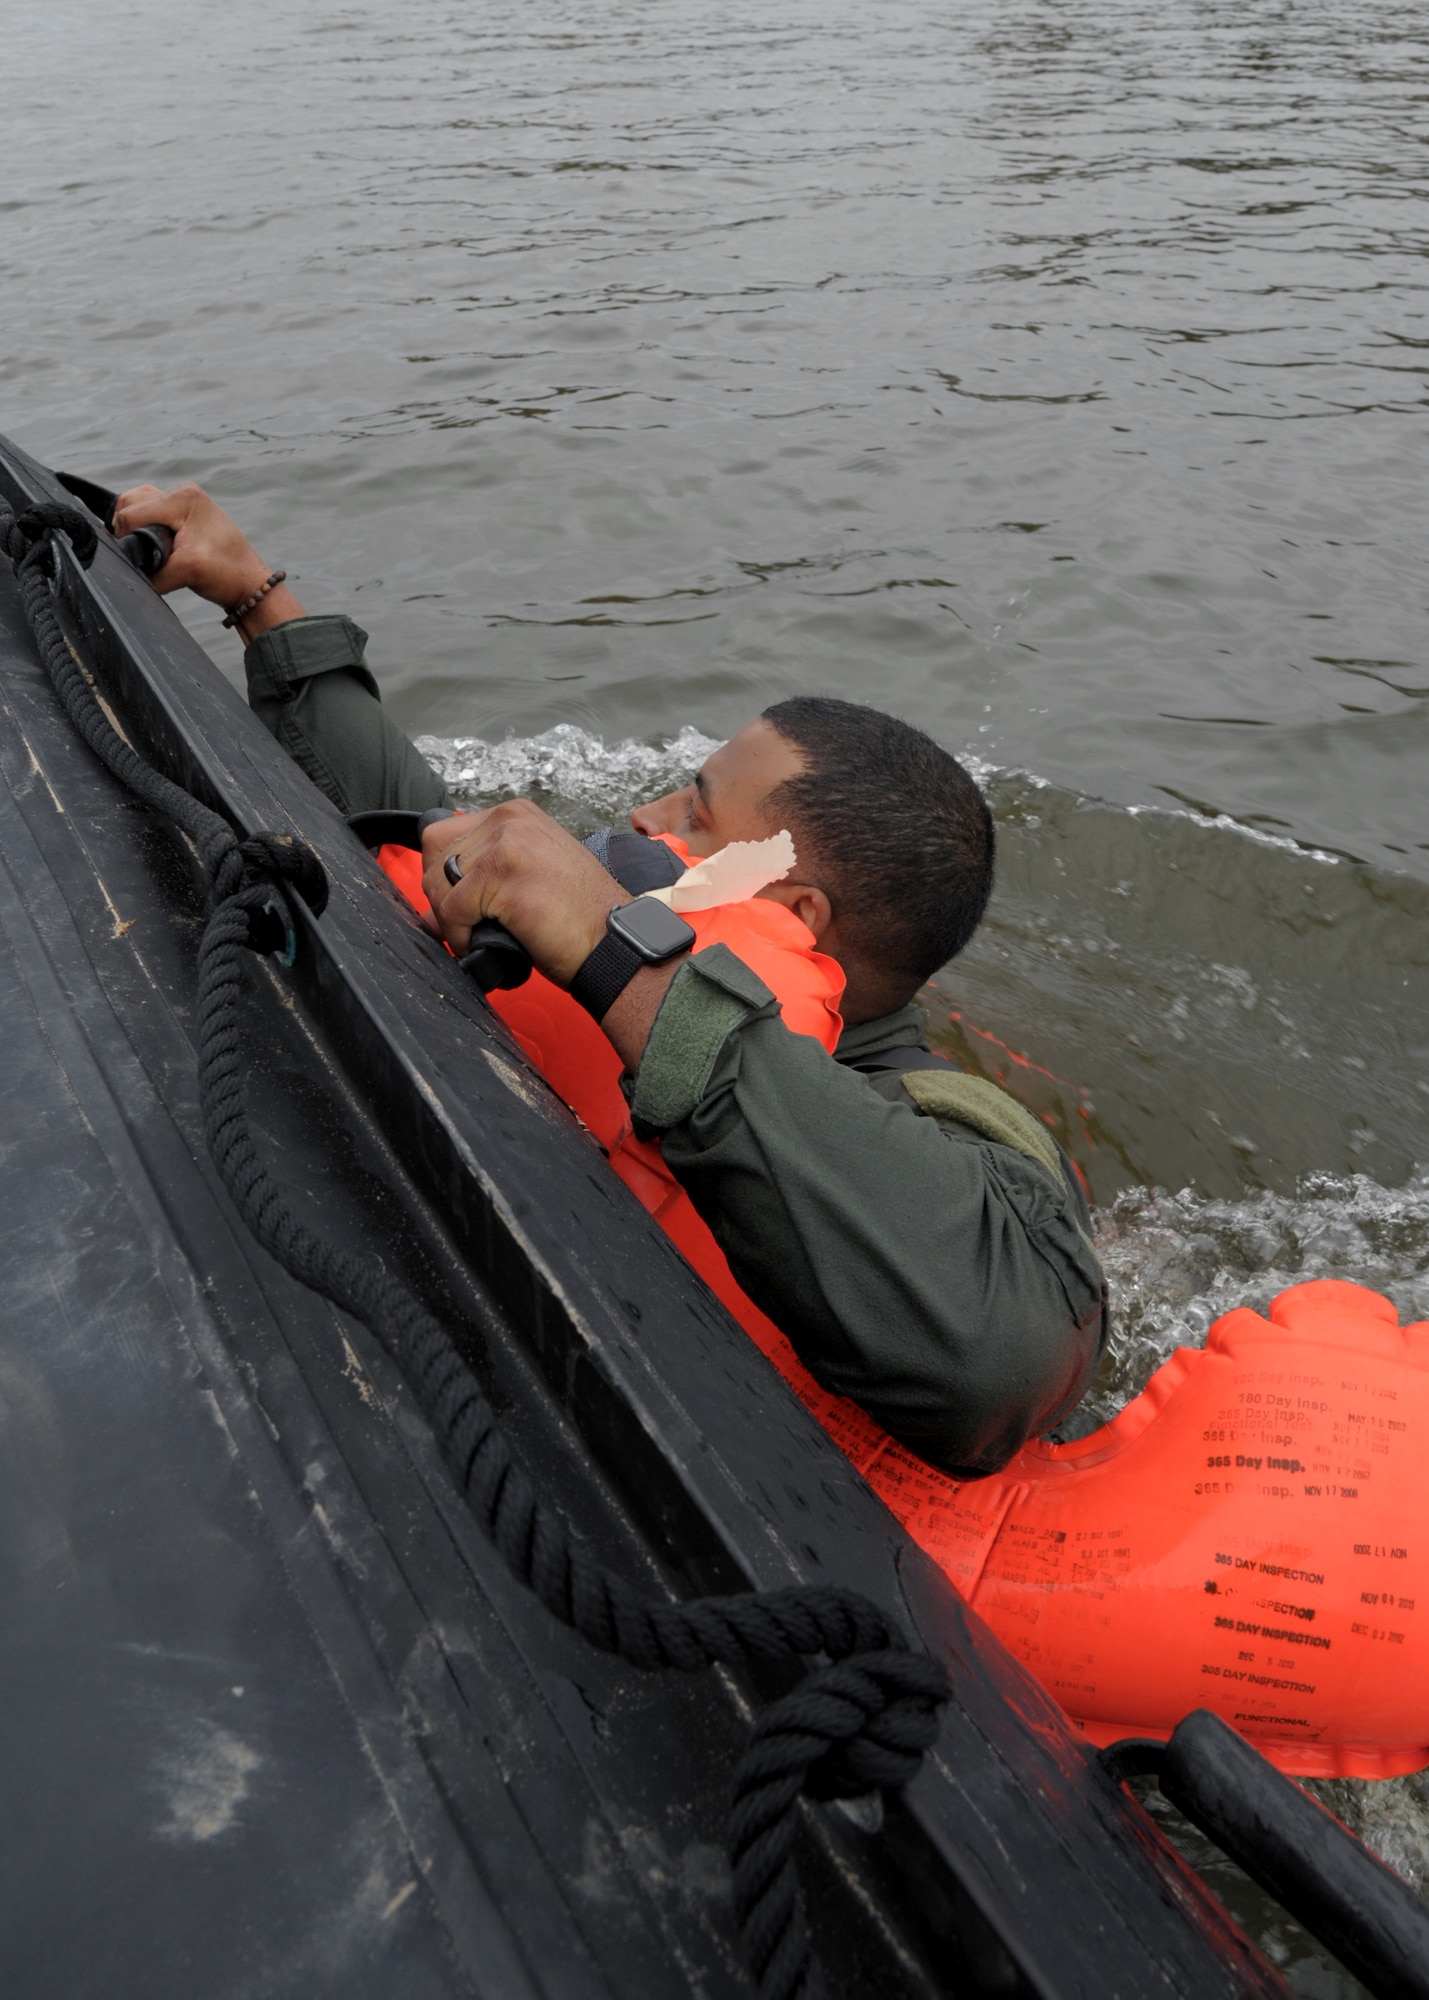 Technical Sgt. Christopher Adams, 908th Operations Support Squadron loadmaster, dives into the Alabama River Nov. 8, 2020, at Maxwell Air Force Base, Alabama.